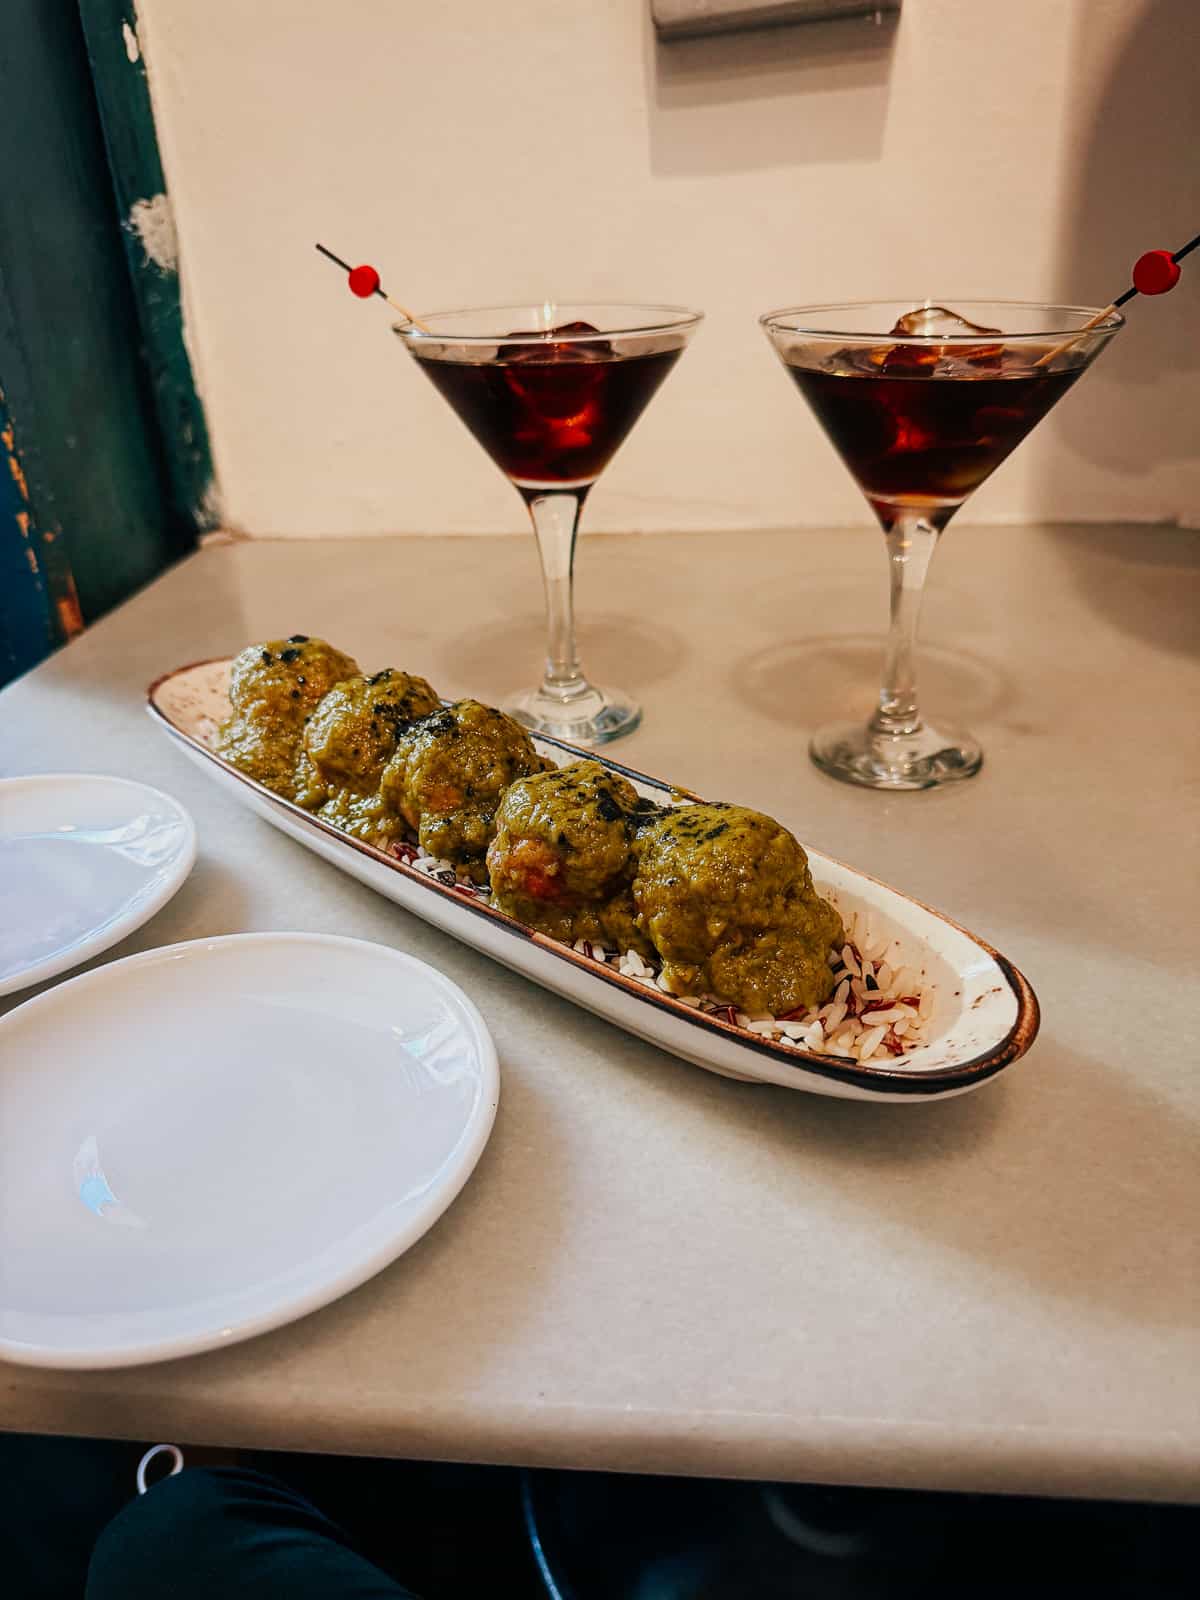 Dining table view at Taberna La Concha featuring a long oval plate of green, herb-coated meatballs next to two martini glasses with red vermouth, and empty white plates, suggesting a prepared dining experience